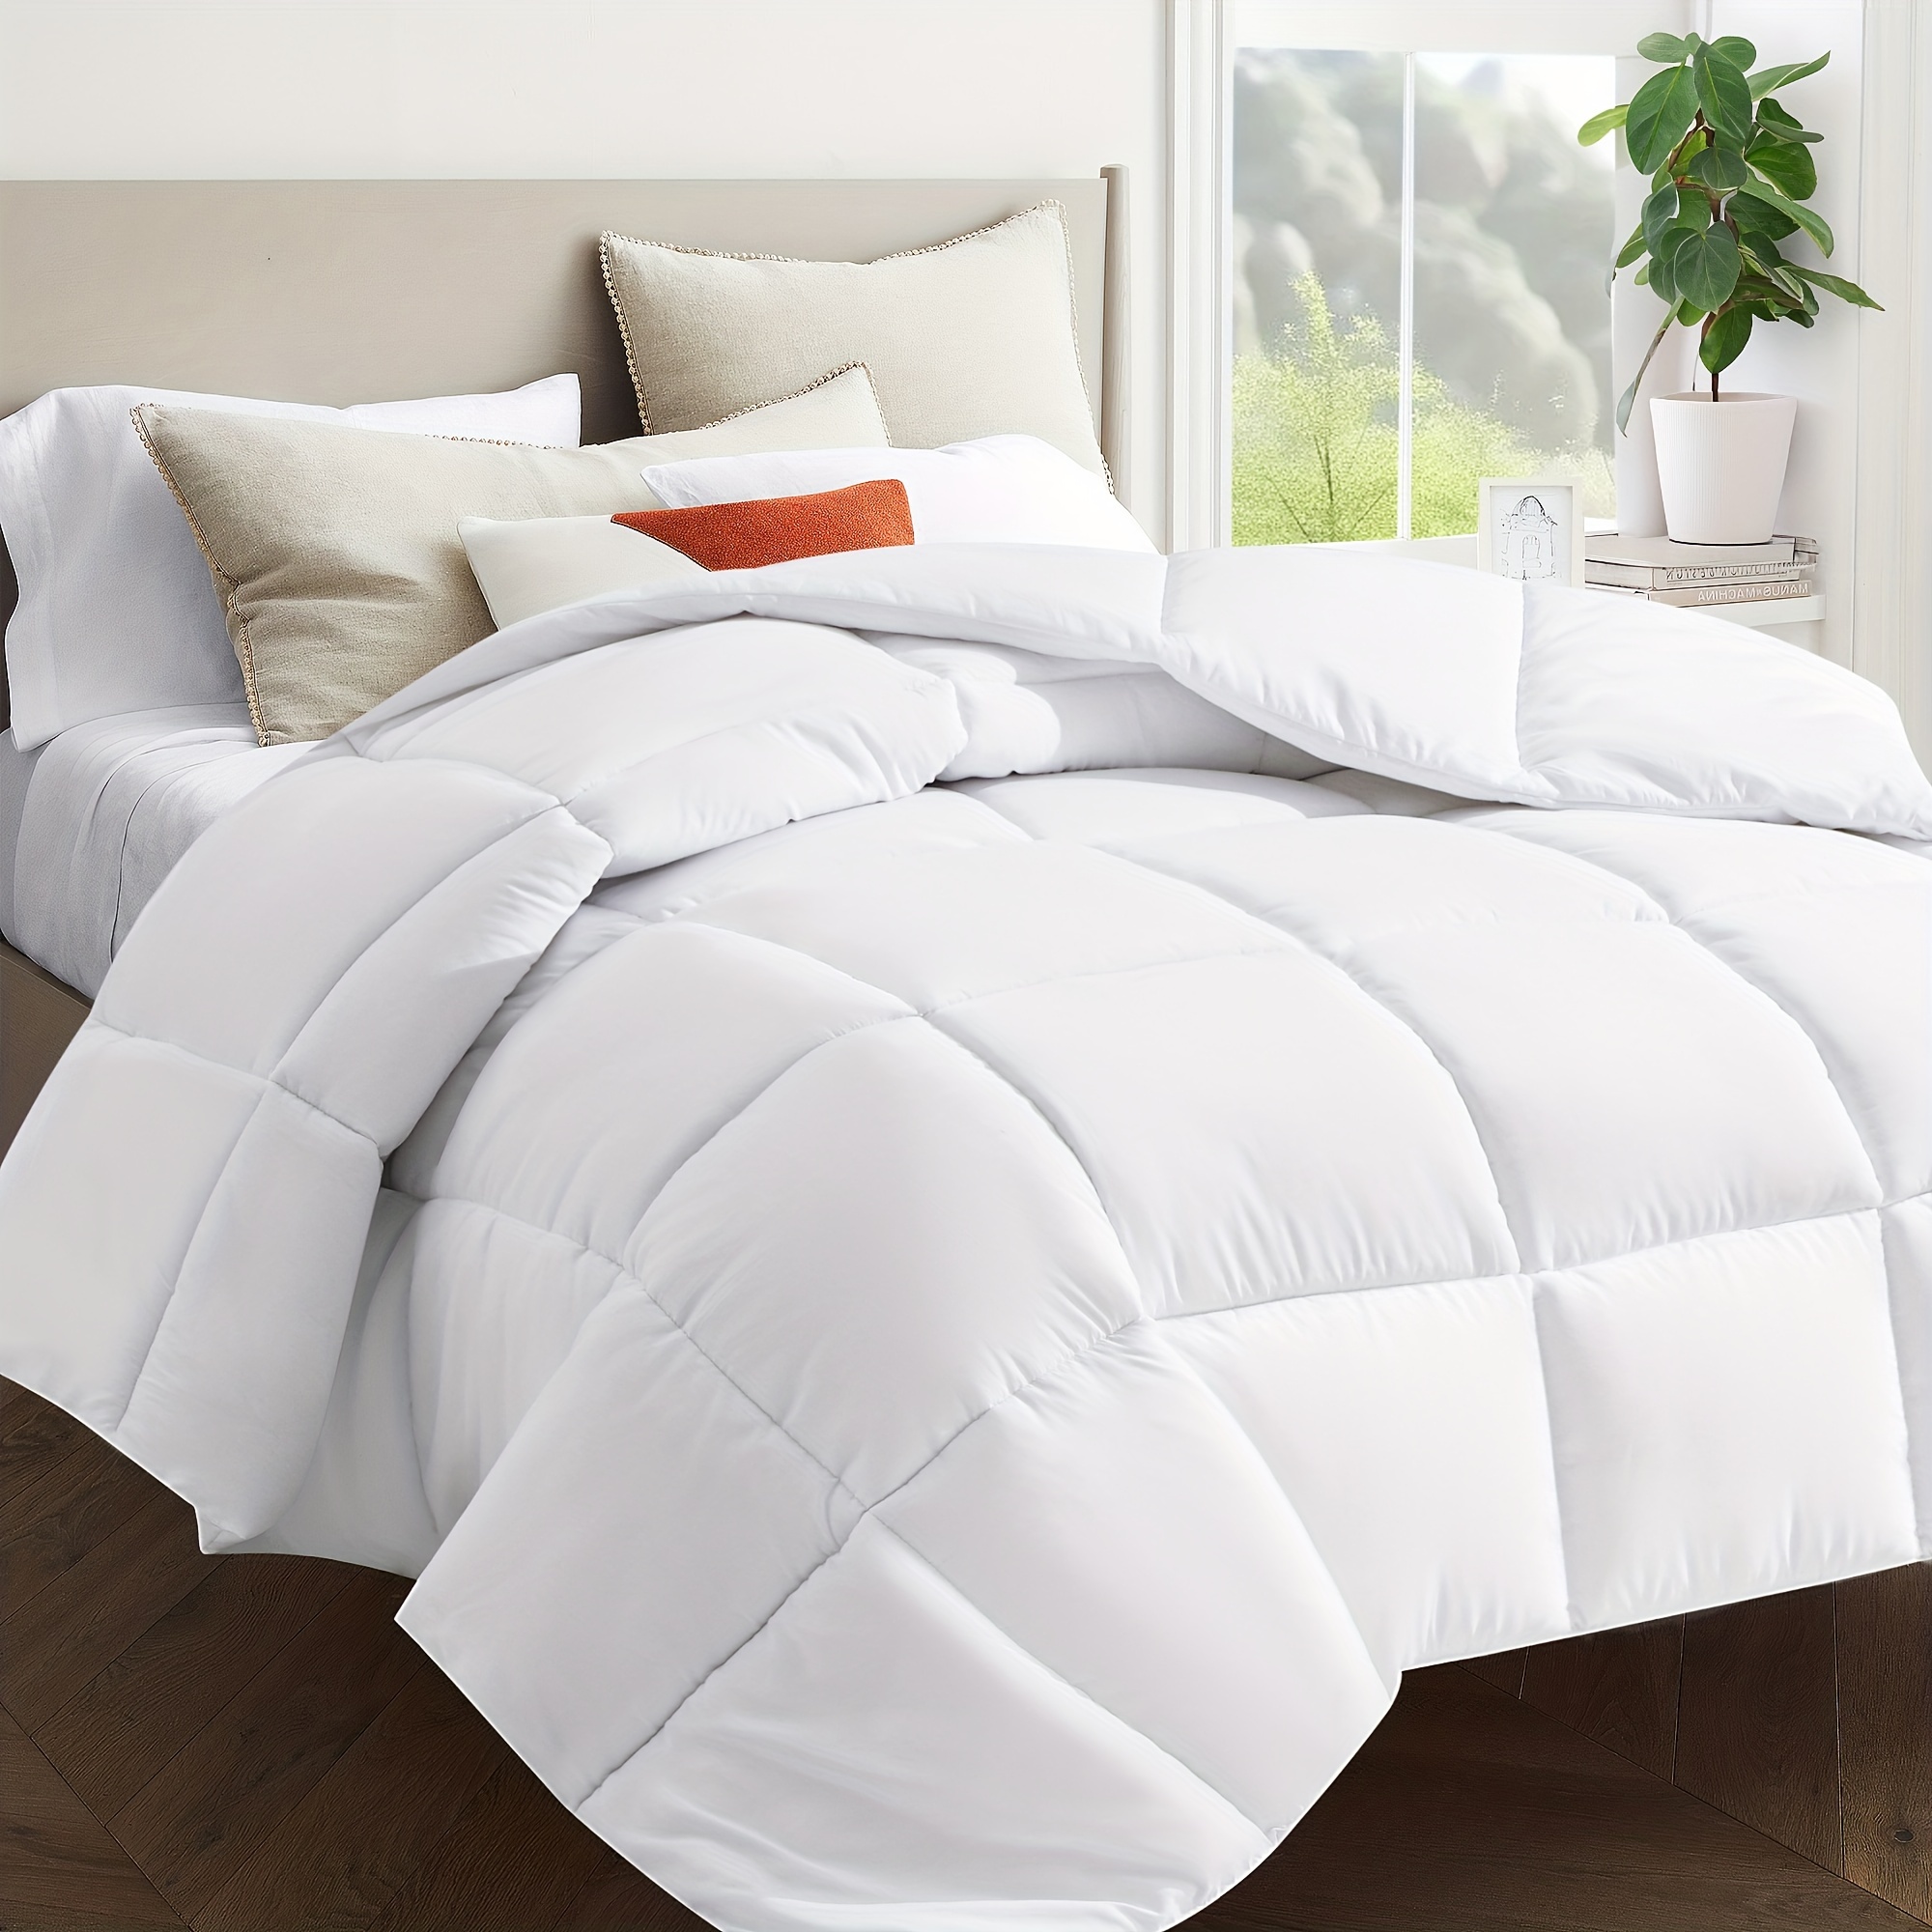 

Comforter Duvet Insert - All Season Down Alternative Quilted Bed Comforters With Corner Tabs - Machine Washable